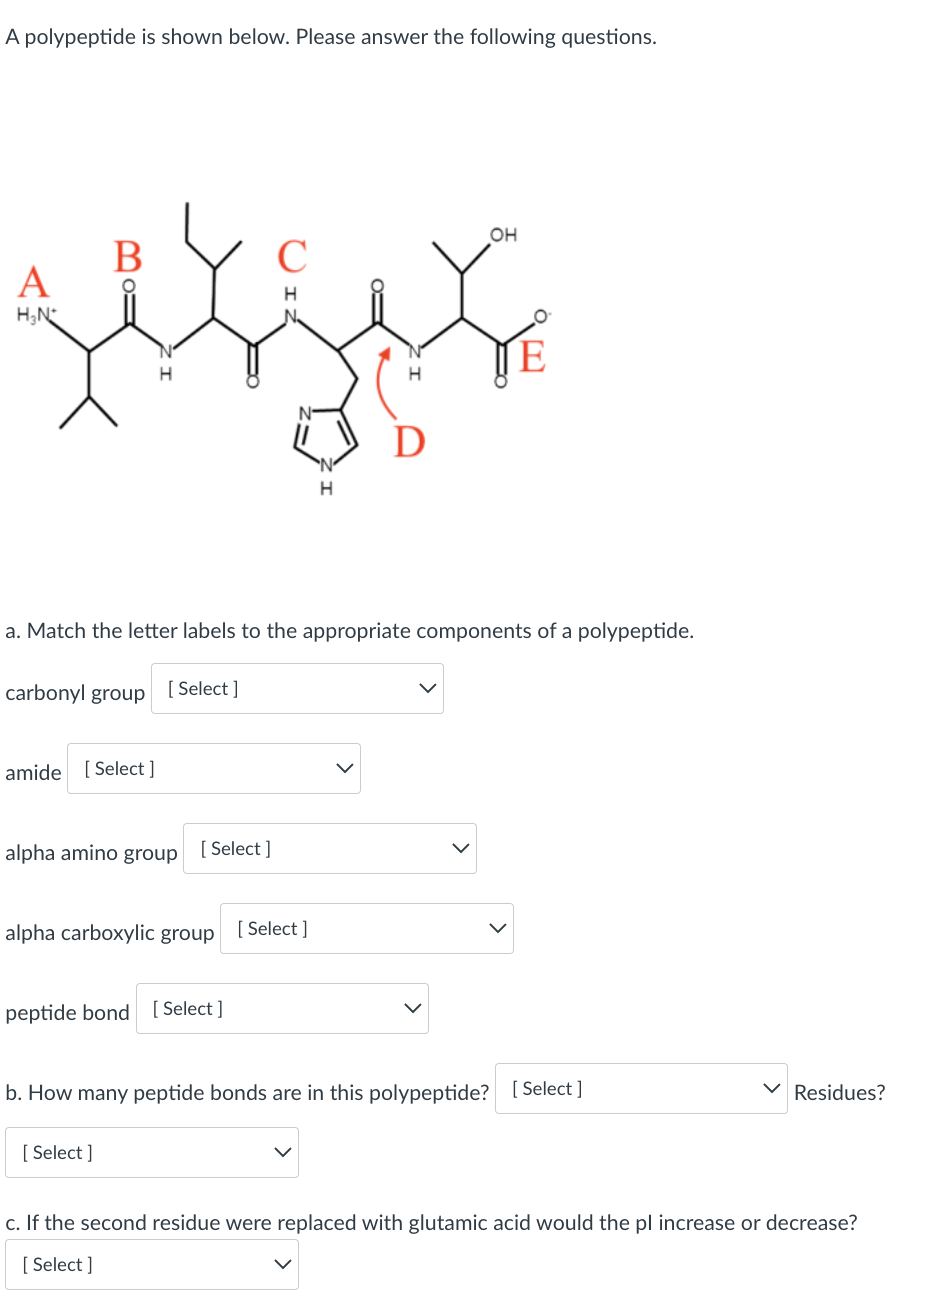 A polypeptide is shown below. Please answer the following questions.
OH
В
A
H;N
E
a. Match the letter labels to the appropriate components of a polypeptide.
carbonyl group
[ Select ]
amide [ Select ]
alpha amino group
[ Select ]
alpha carboxylic group
[ Select ]
peptide bond [Select]
b. How many peptide bonds are in this polypeptide? [ Select ]
V Residues?
[ Select ]
c. If the second residue were replaced with glutamic acid would the pl increase or decrease?
[ Select ]
>
